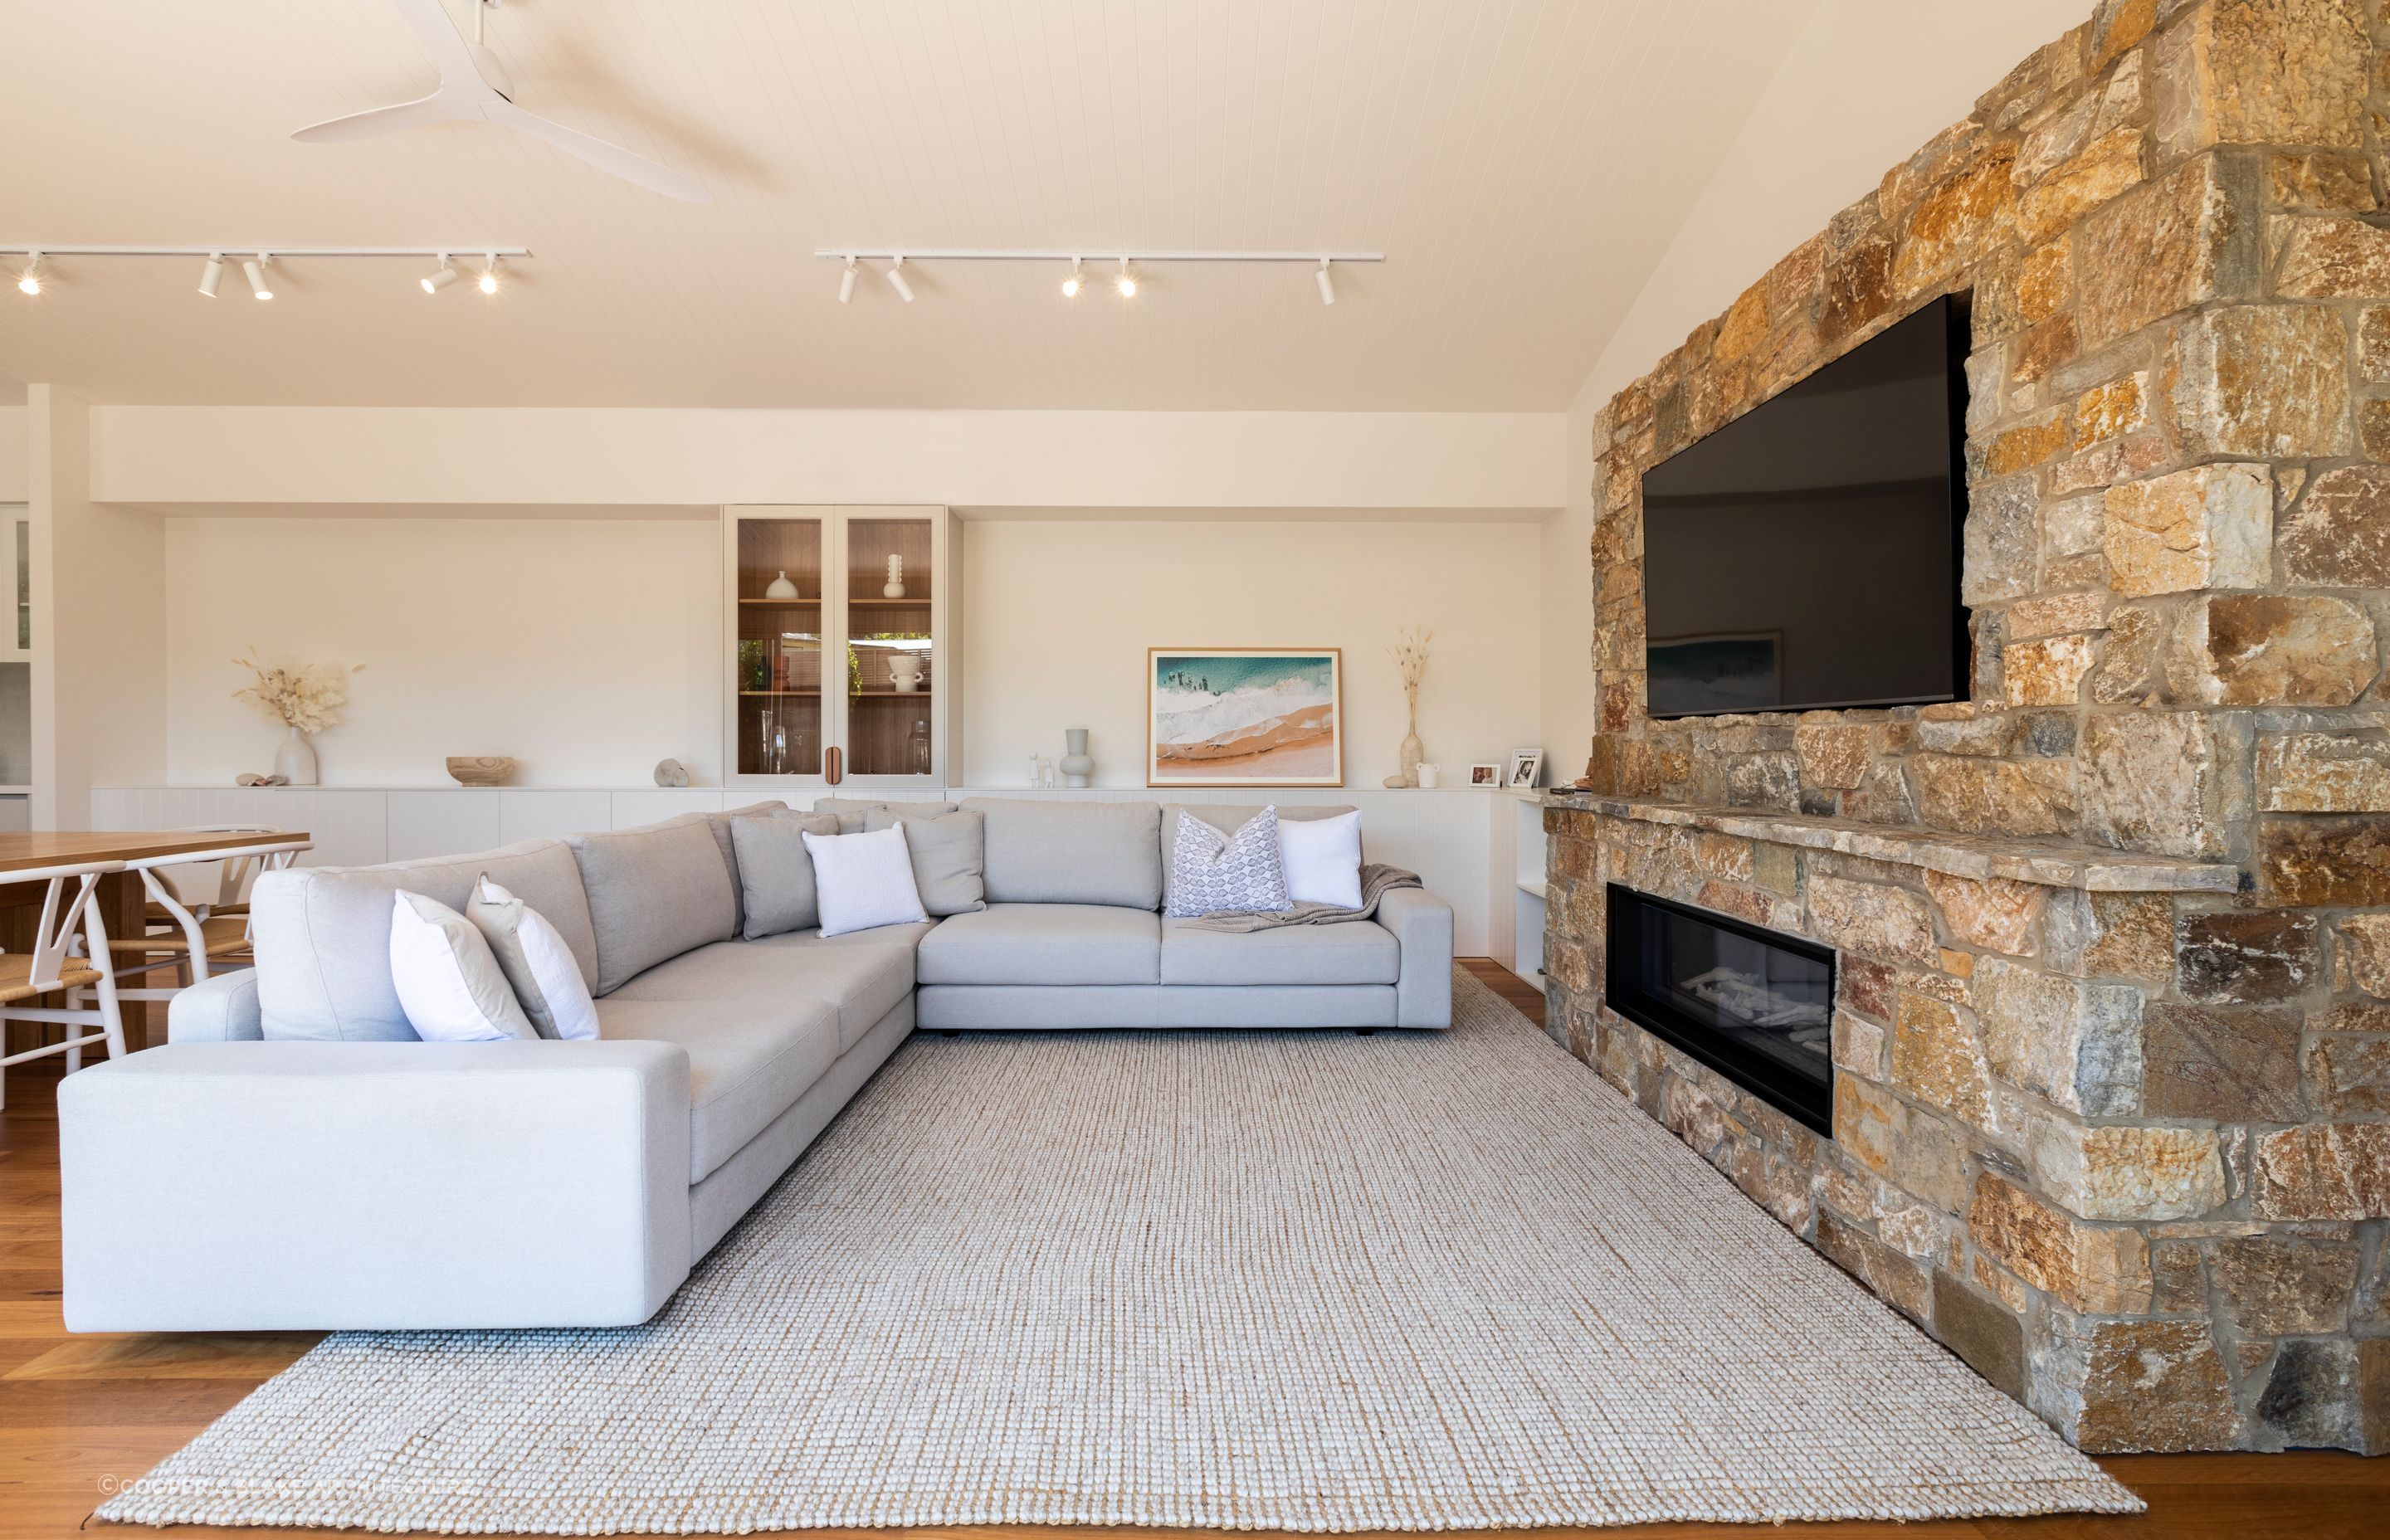 A brick or stone fireplace can be the centrepiece in a Hamptons-style living room. Project: Munday in the Hamptons by Copper &amp; Blake Architecture.